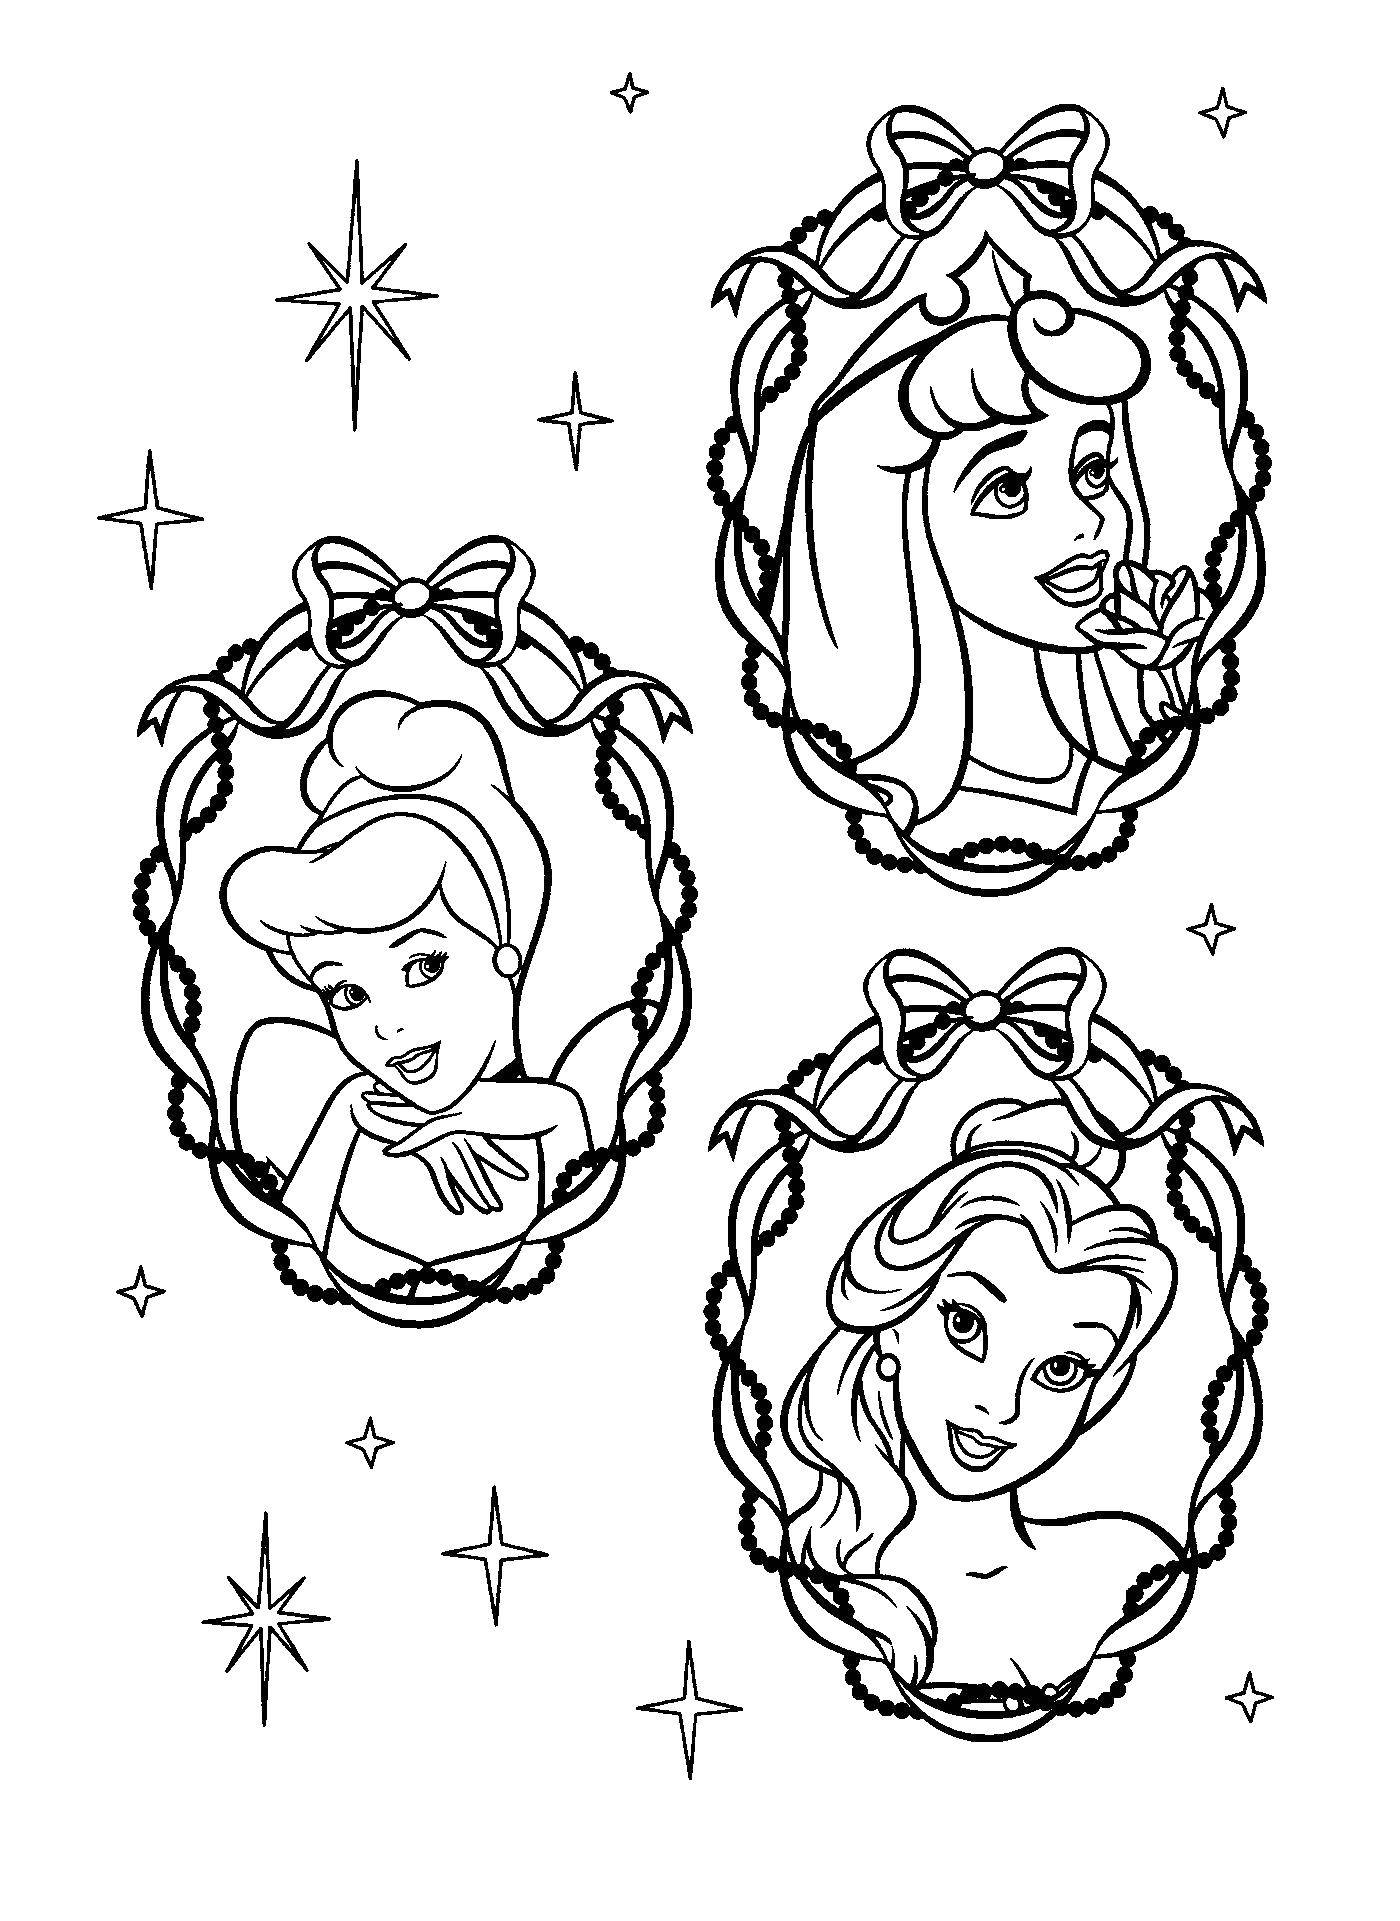 Coloring Sleeping beauty, Belle and Cinderella. Category Disney coloring pages. Tags:  Disney, Cinderella, Belle.